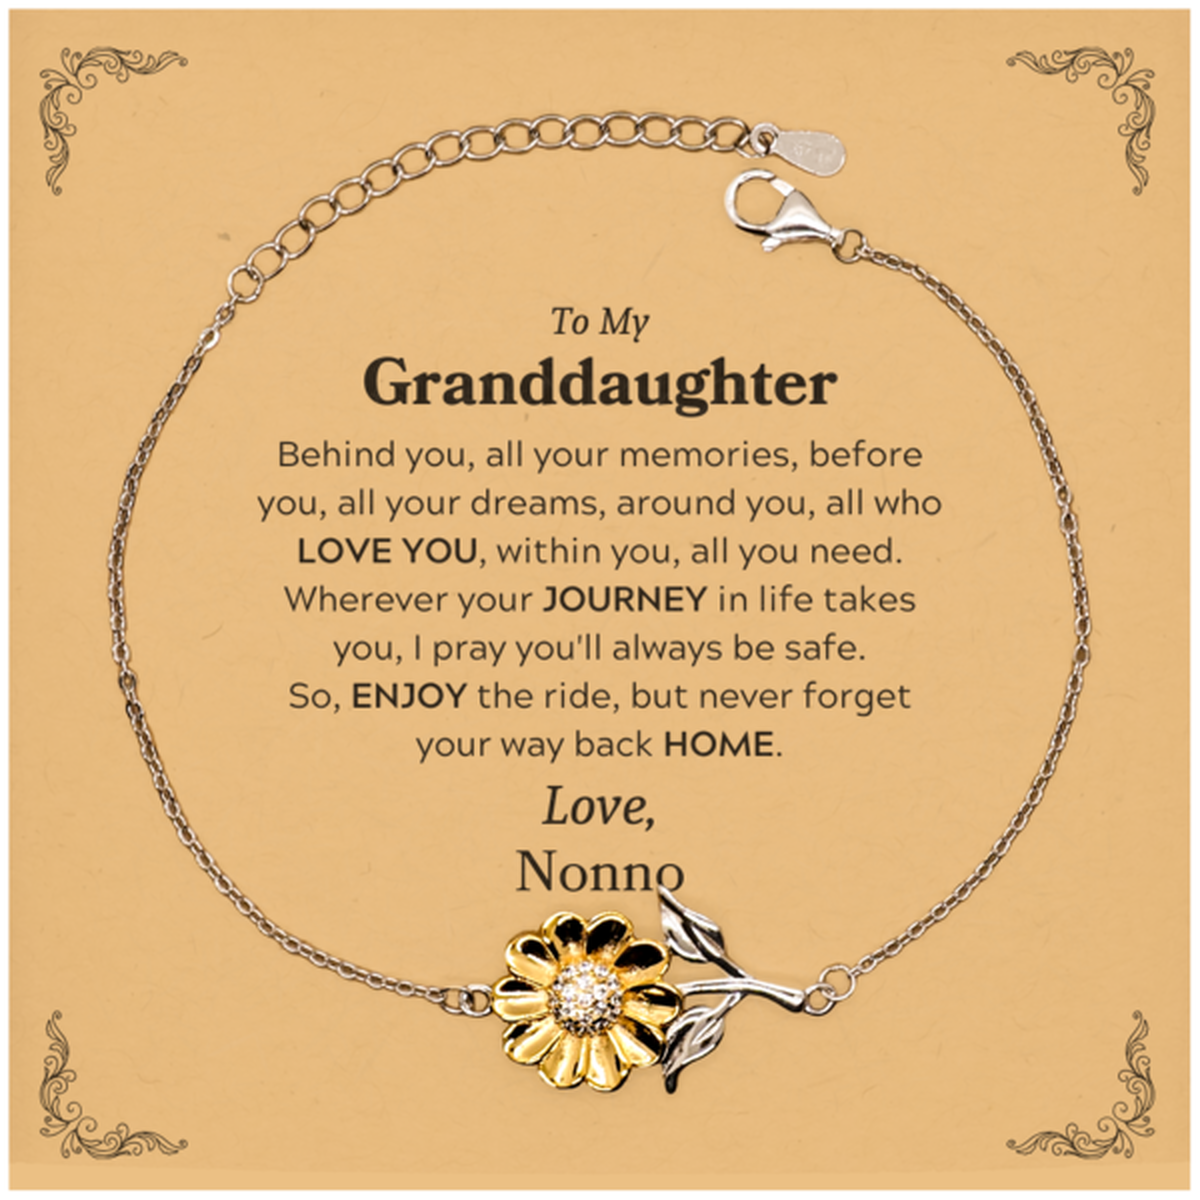 To My Granddaughter Graduation Gifts from Nonno, Granddaughter Sunflower Bracelet Christmas Birthday Gifts for Granddaughter Behind you, all your memories, before you, all your dreams. Love, Nonno